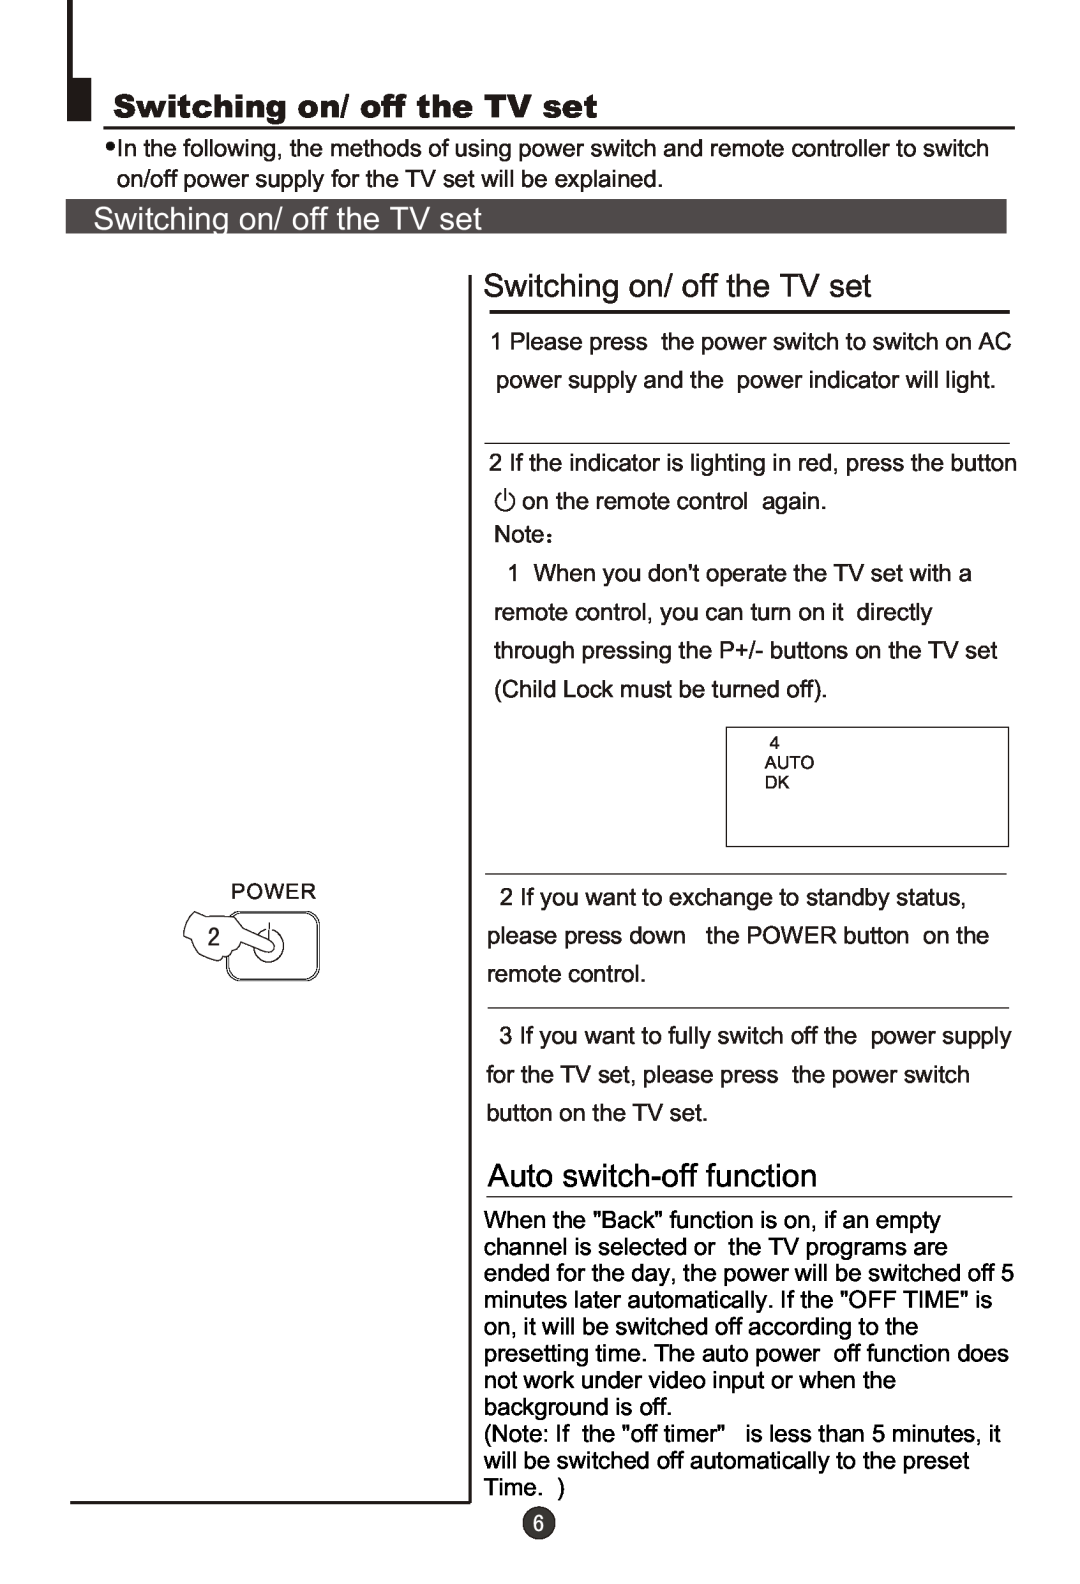 Haier DTA-2198PF owner manual Switching on/ off the TV set, Auto switch-off function 